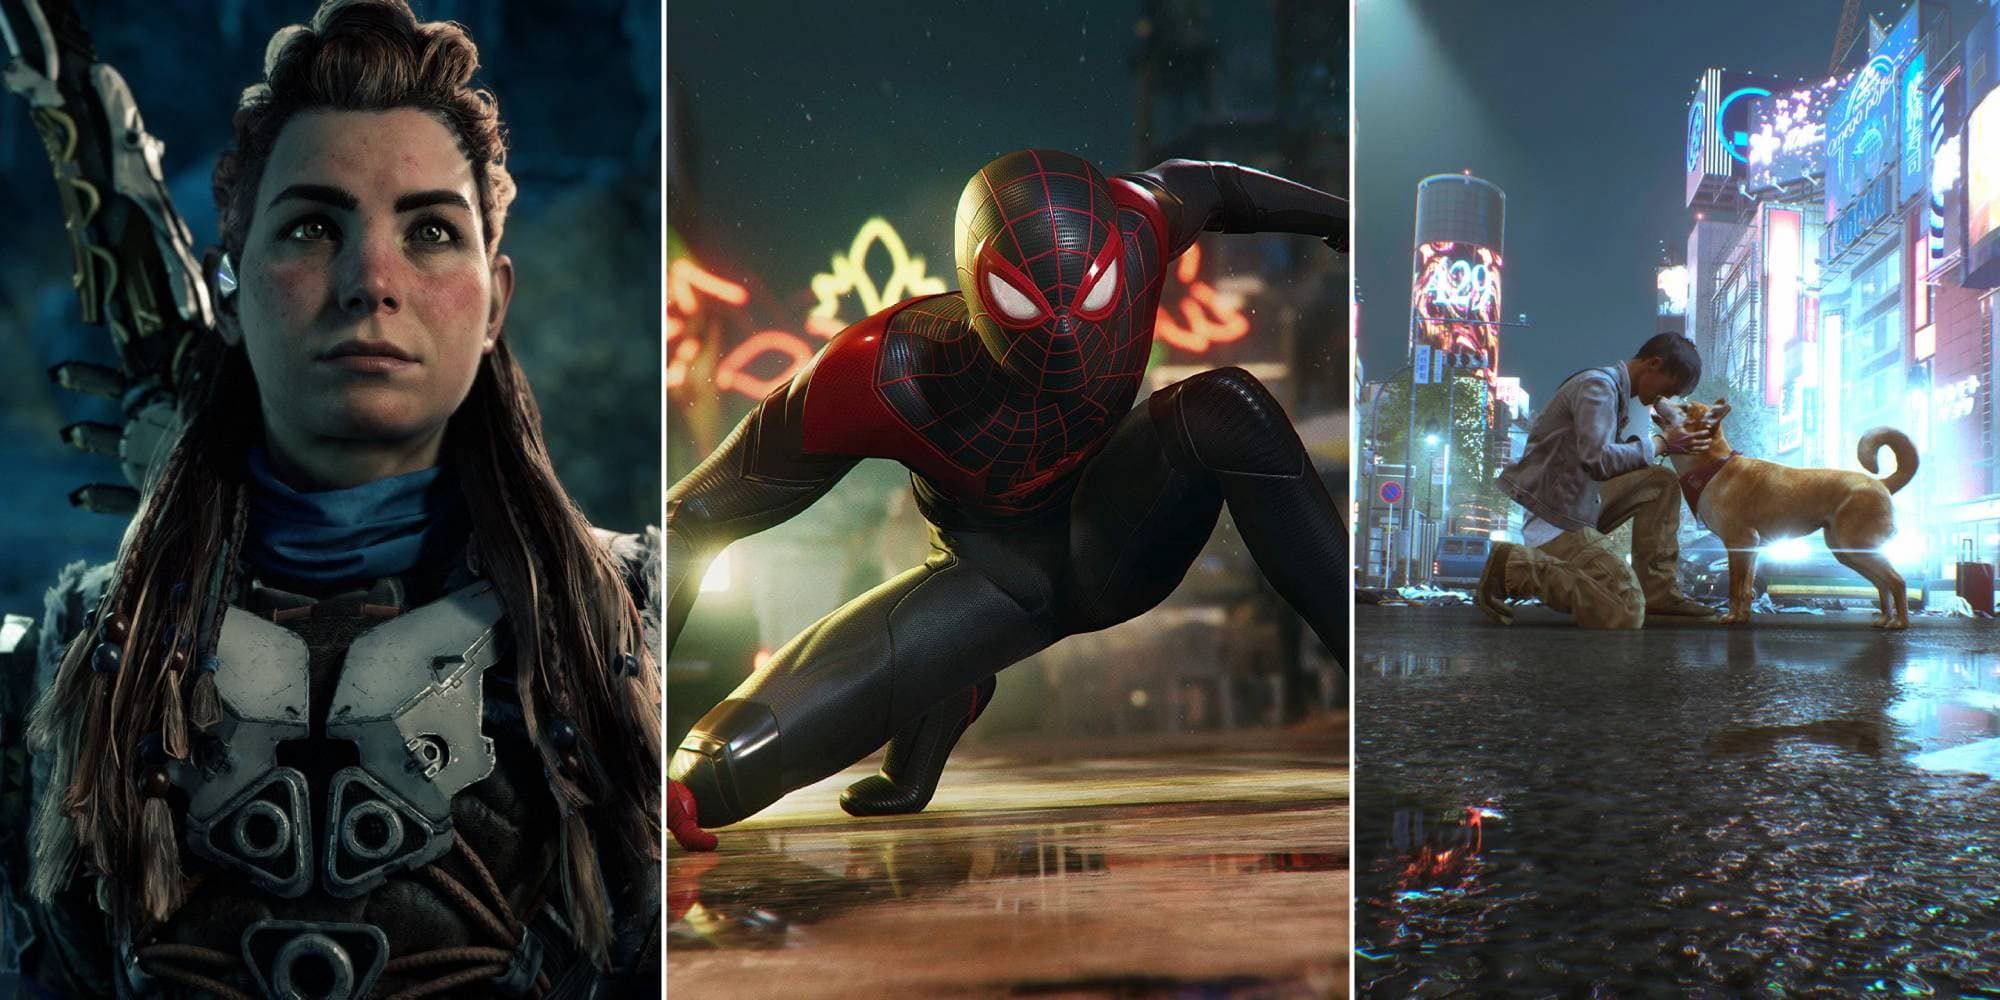 Aloy looks on in Horizon Forbidden West, Miles Morales lands on the street in Marvel's Spider-Man: Miles Morales, and a man pets a dog in Ghostwire: Tokyo.